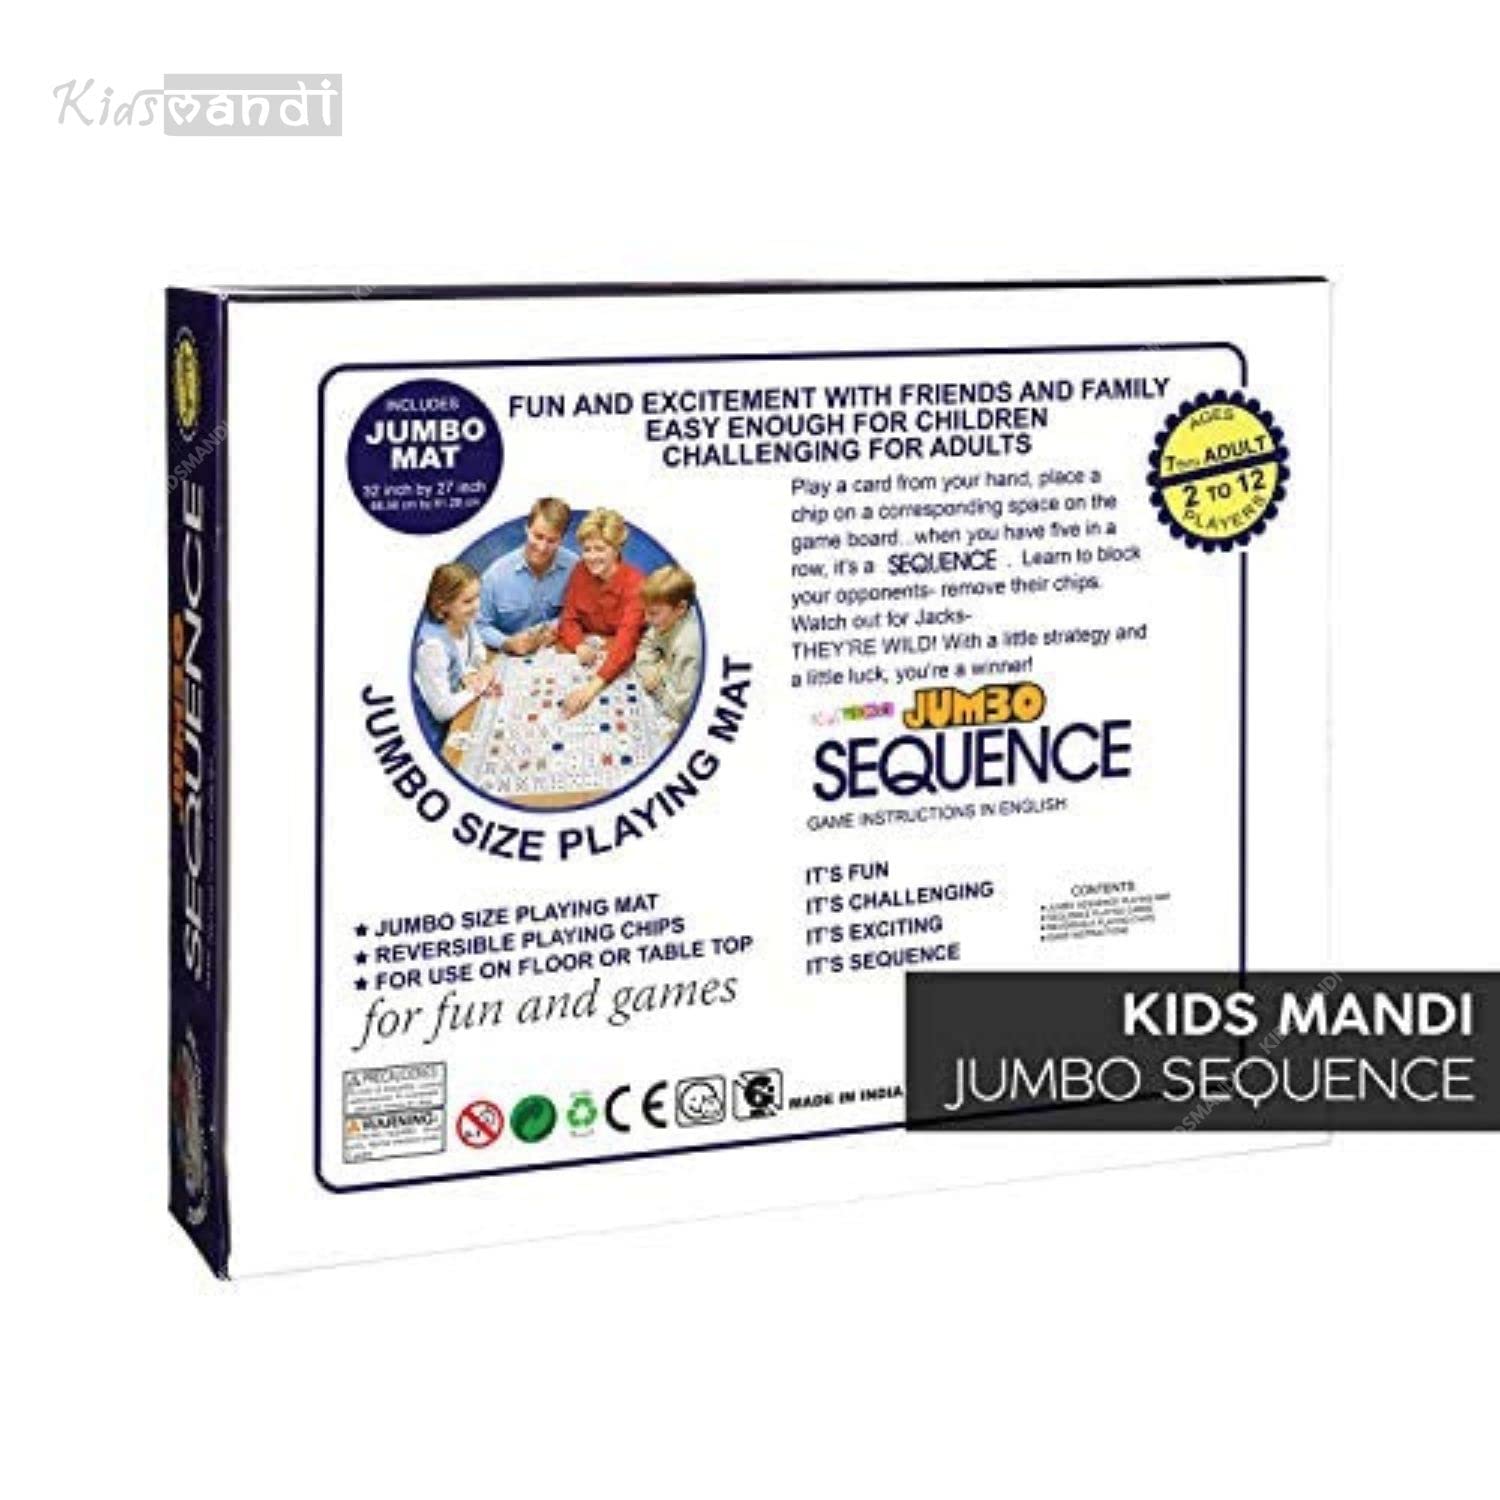 "KIDS MANDI jumbo sequence game with colorful board and cards."